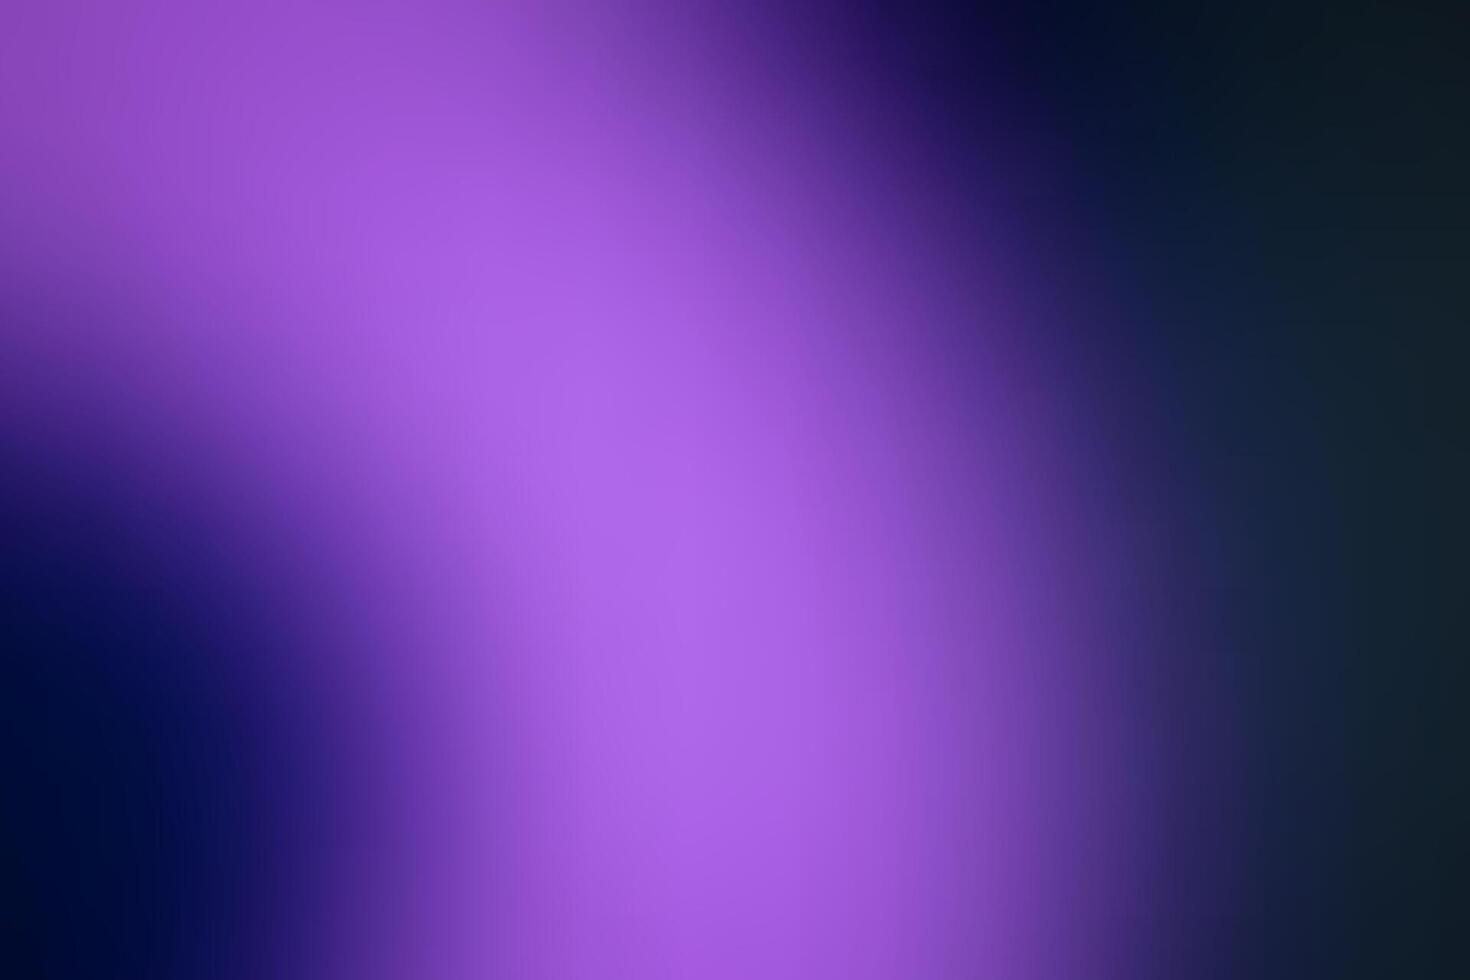 Colorful Blurry Artistic Wallpaper Background vector